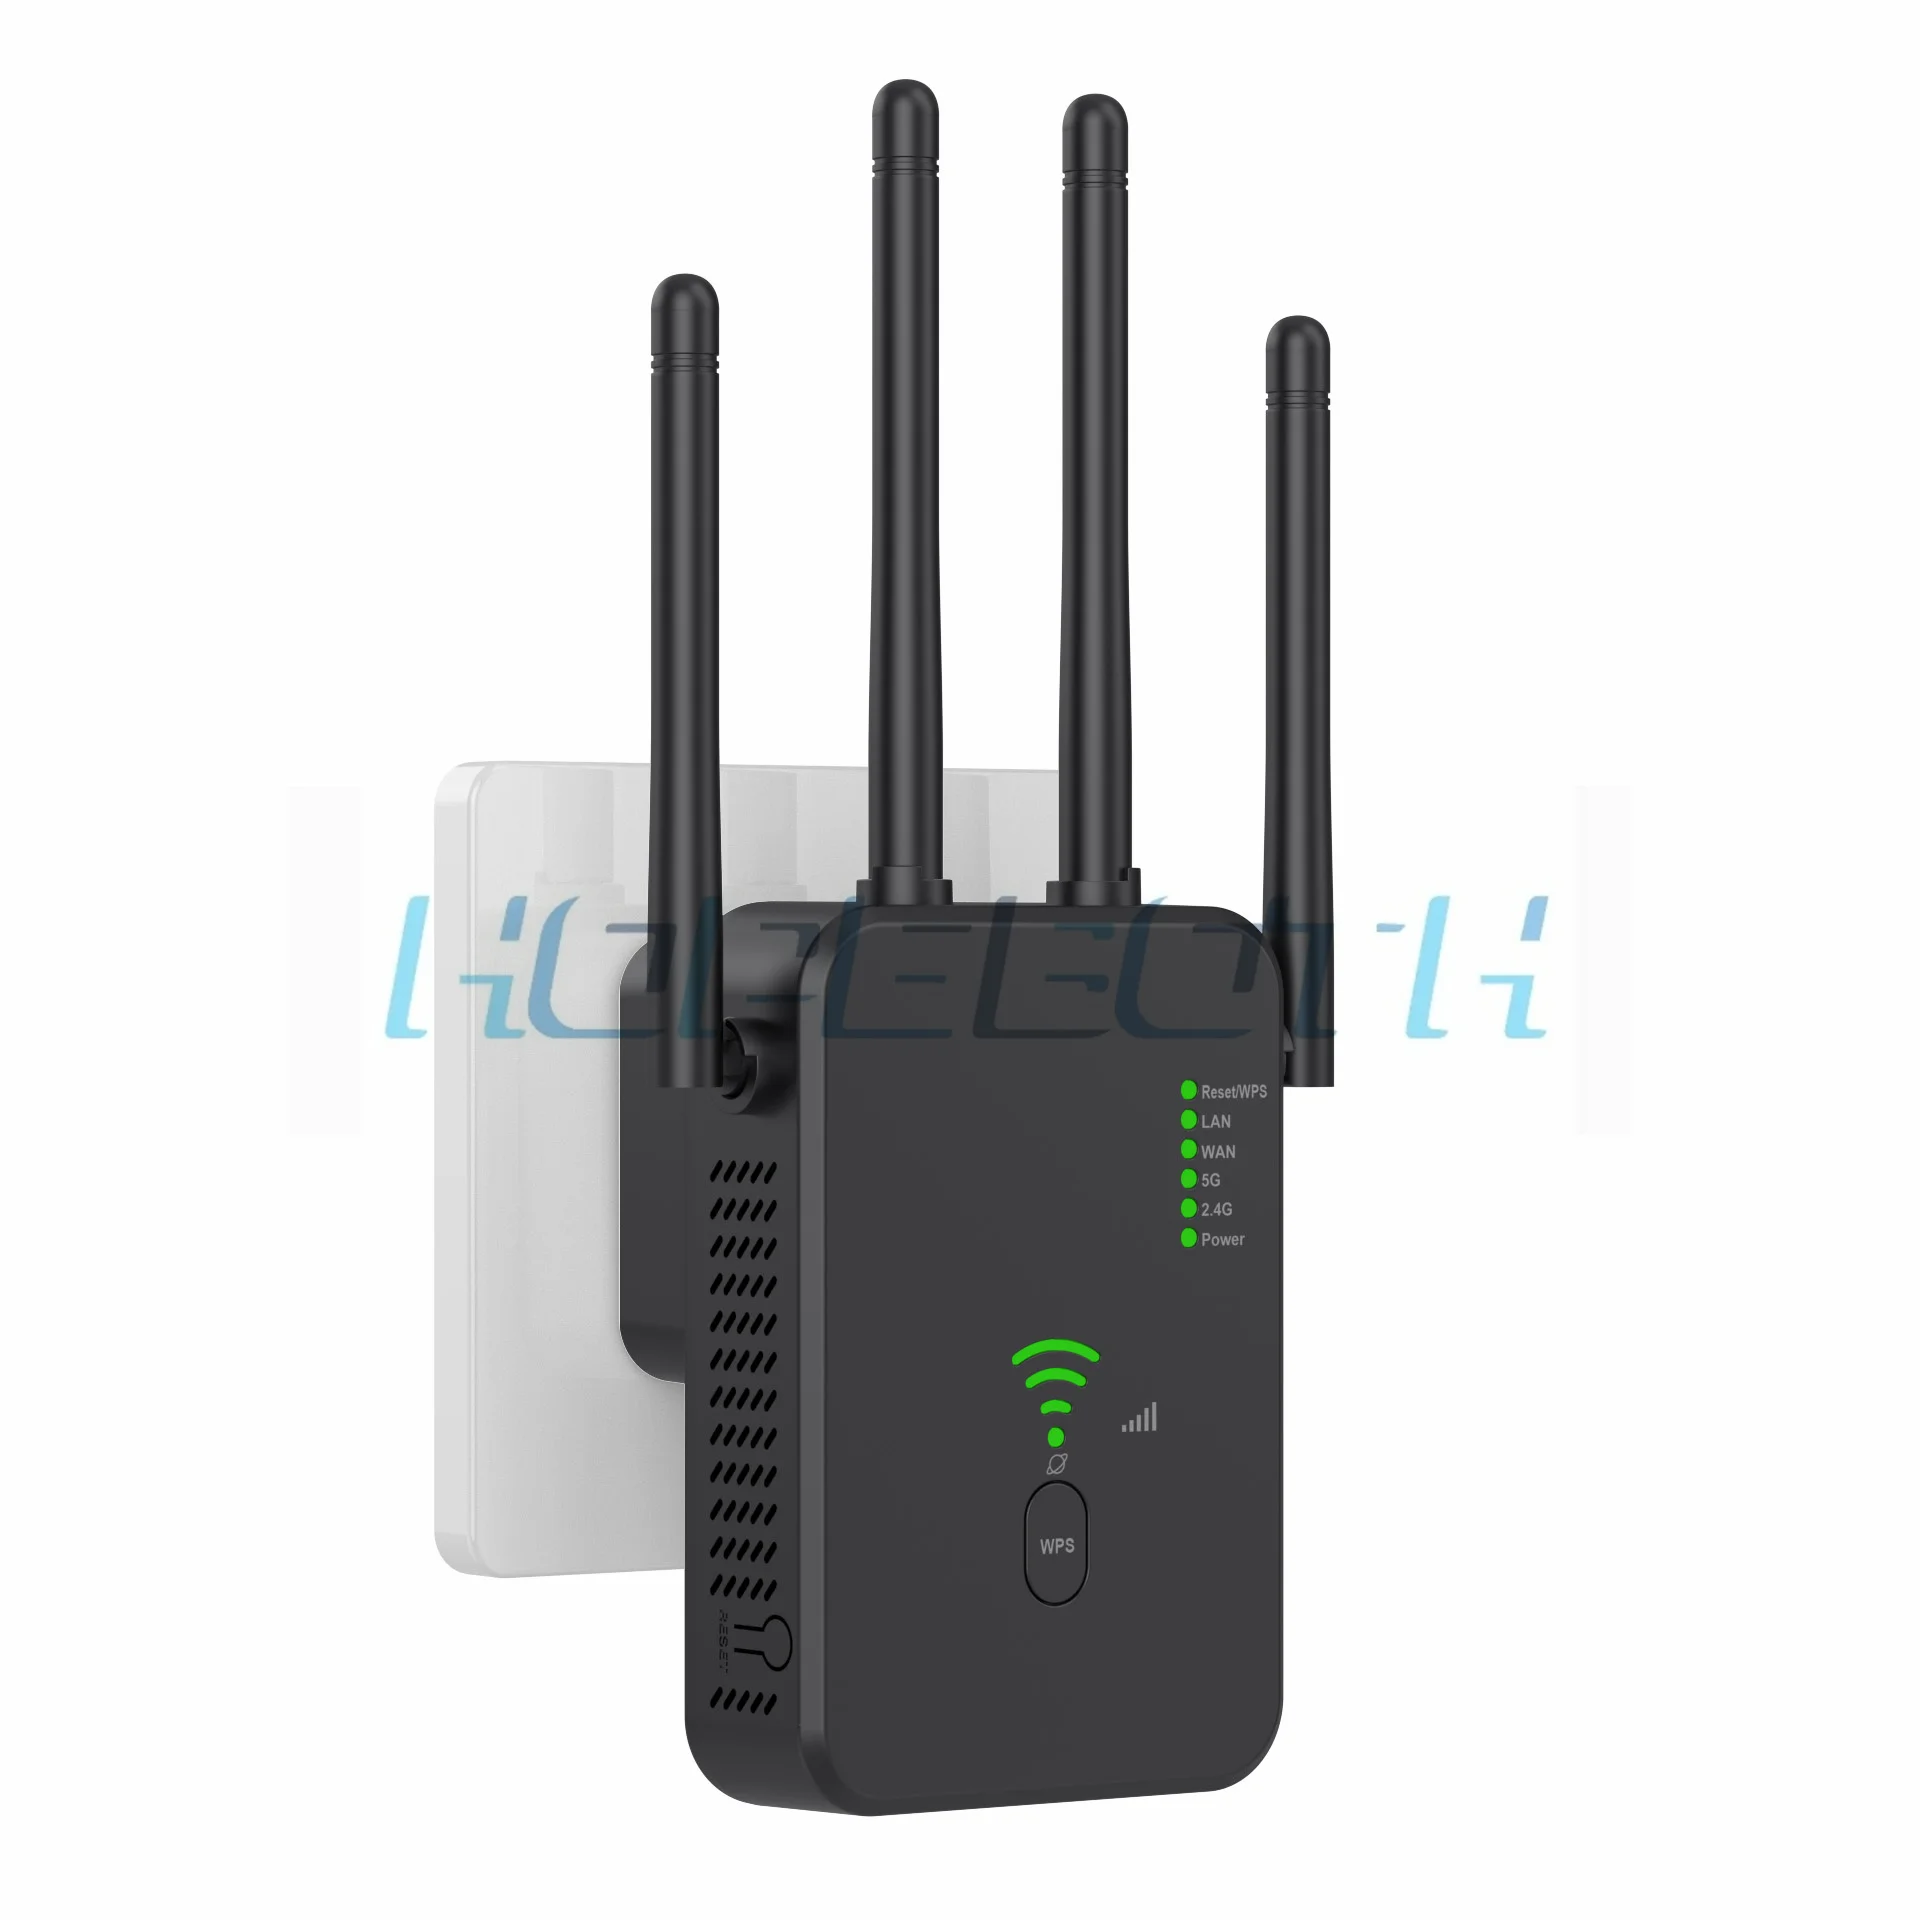 5Ghz Wireless WiFi Repeater 1200Mbps Router Wifi Booster 2.4G Long Range  Extender 5G Wi-Fi Signal Amplifier Repeater Black/White - AliExpress